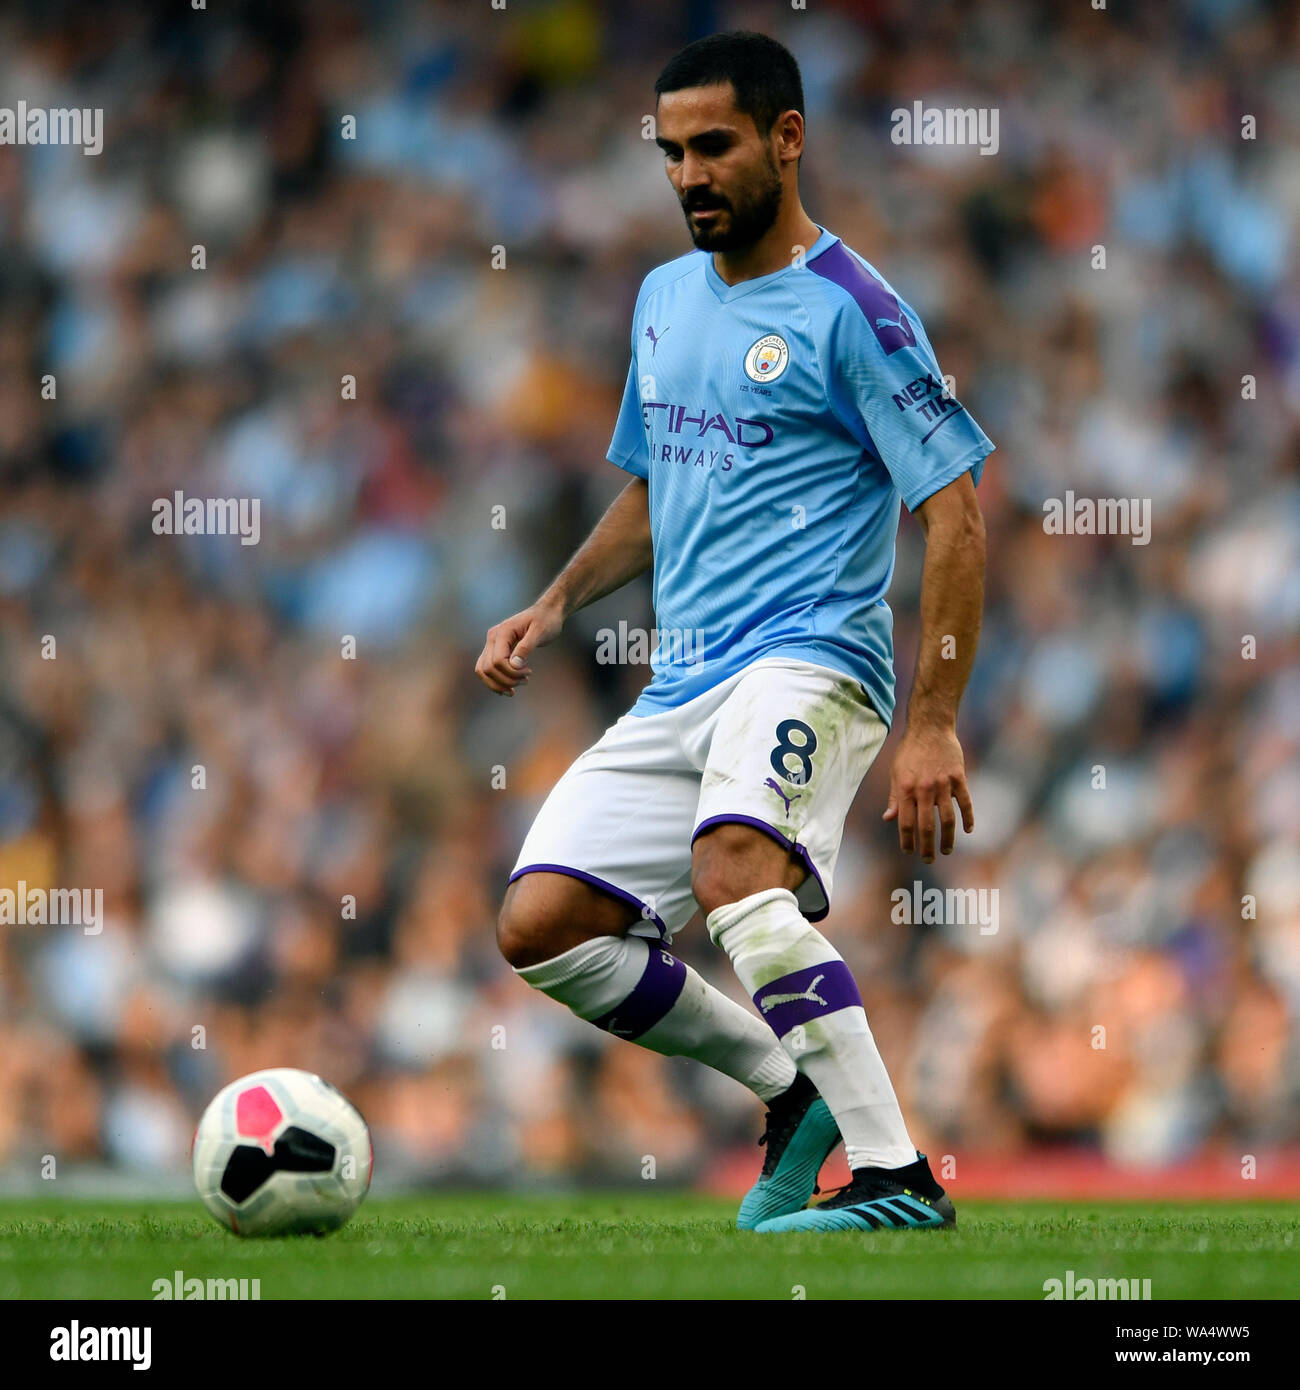 17th August 2019; Etihad Stadium, Manchester, Greater Manchester, England; Manchester City versus Tottenham Hotspur; Ilkay Gundogan of Manchester City looks to bring the ball under control - Strictly Editorial Use Only. No use with unauthorized audio, video, data, fixture lists, club/league logos or 'live' services. Online in-match use limited to 120 images, no video emulation. Stock Photo